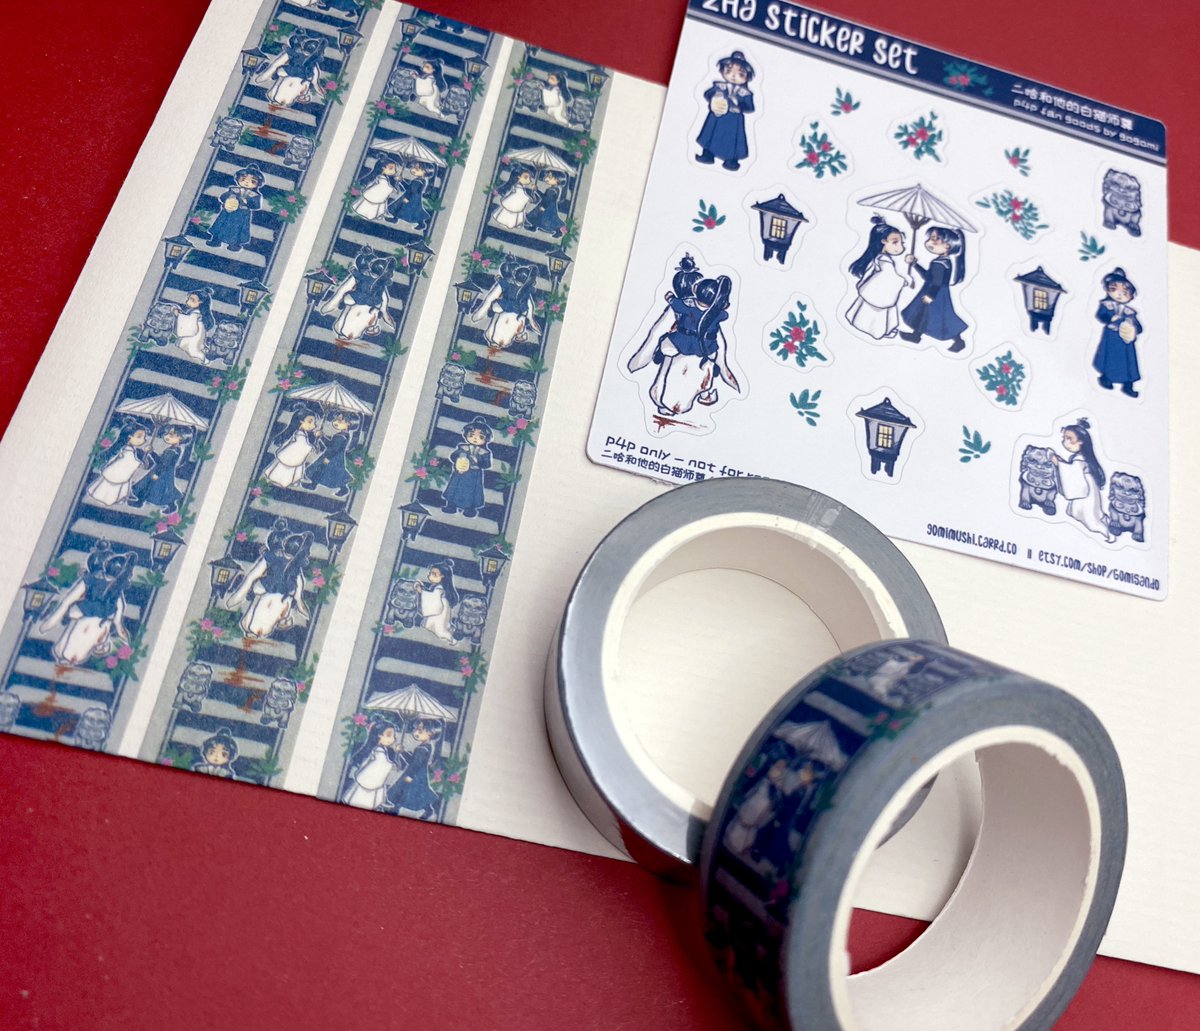 Screams in 2ha P4P merch bc it's 1:30am*bangs a pot anyways* GET UR PAIN HERE!!! GET IT HERE!!I should probably go to sleep, but I also have a MDZS washi tape to put up tomorrow!!! ;A; AAaahWASHI TAPE:  https://www.etsy.com/uk/listing/850960668/3799-stairs-ranwan-washi-tape-2ha-er-h MINI STICKER SHEET:  https://www.etsy.com/uk/listing/850967542/ranwan-mini-sticker-sheet-2ha-er-h